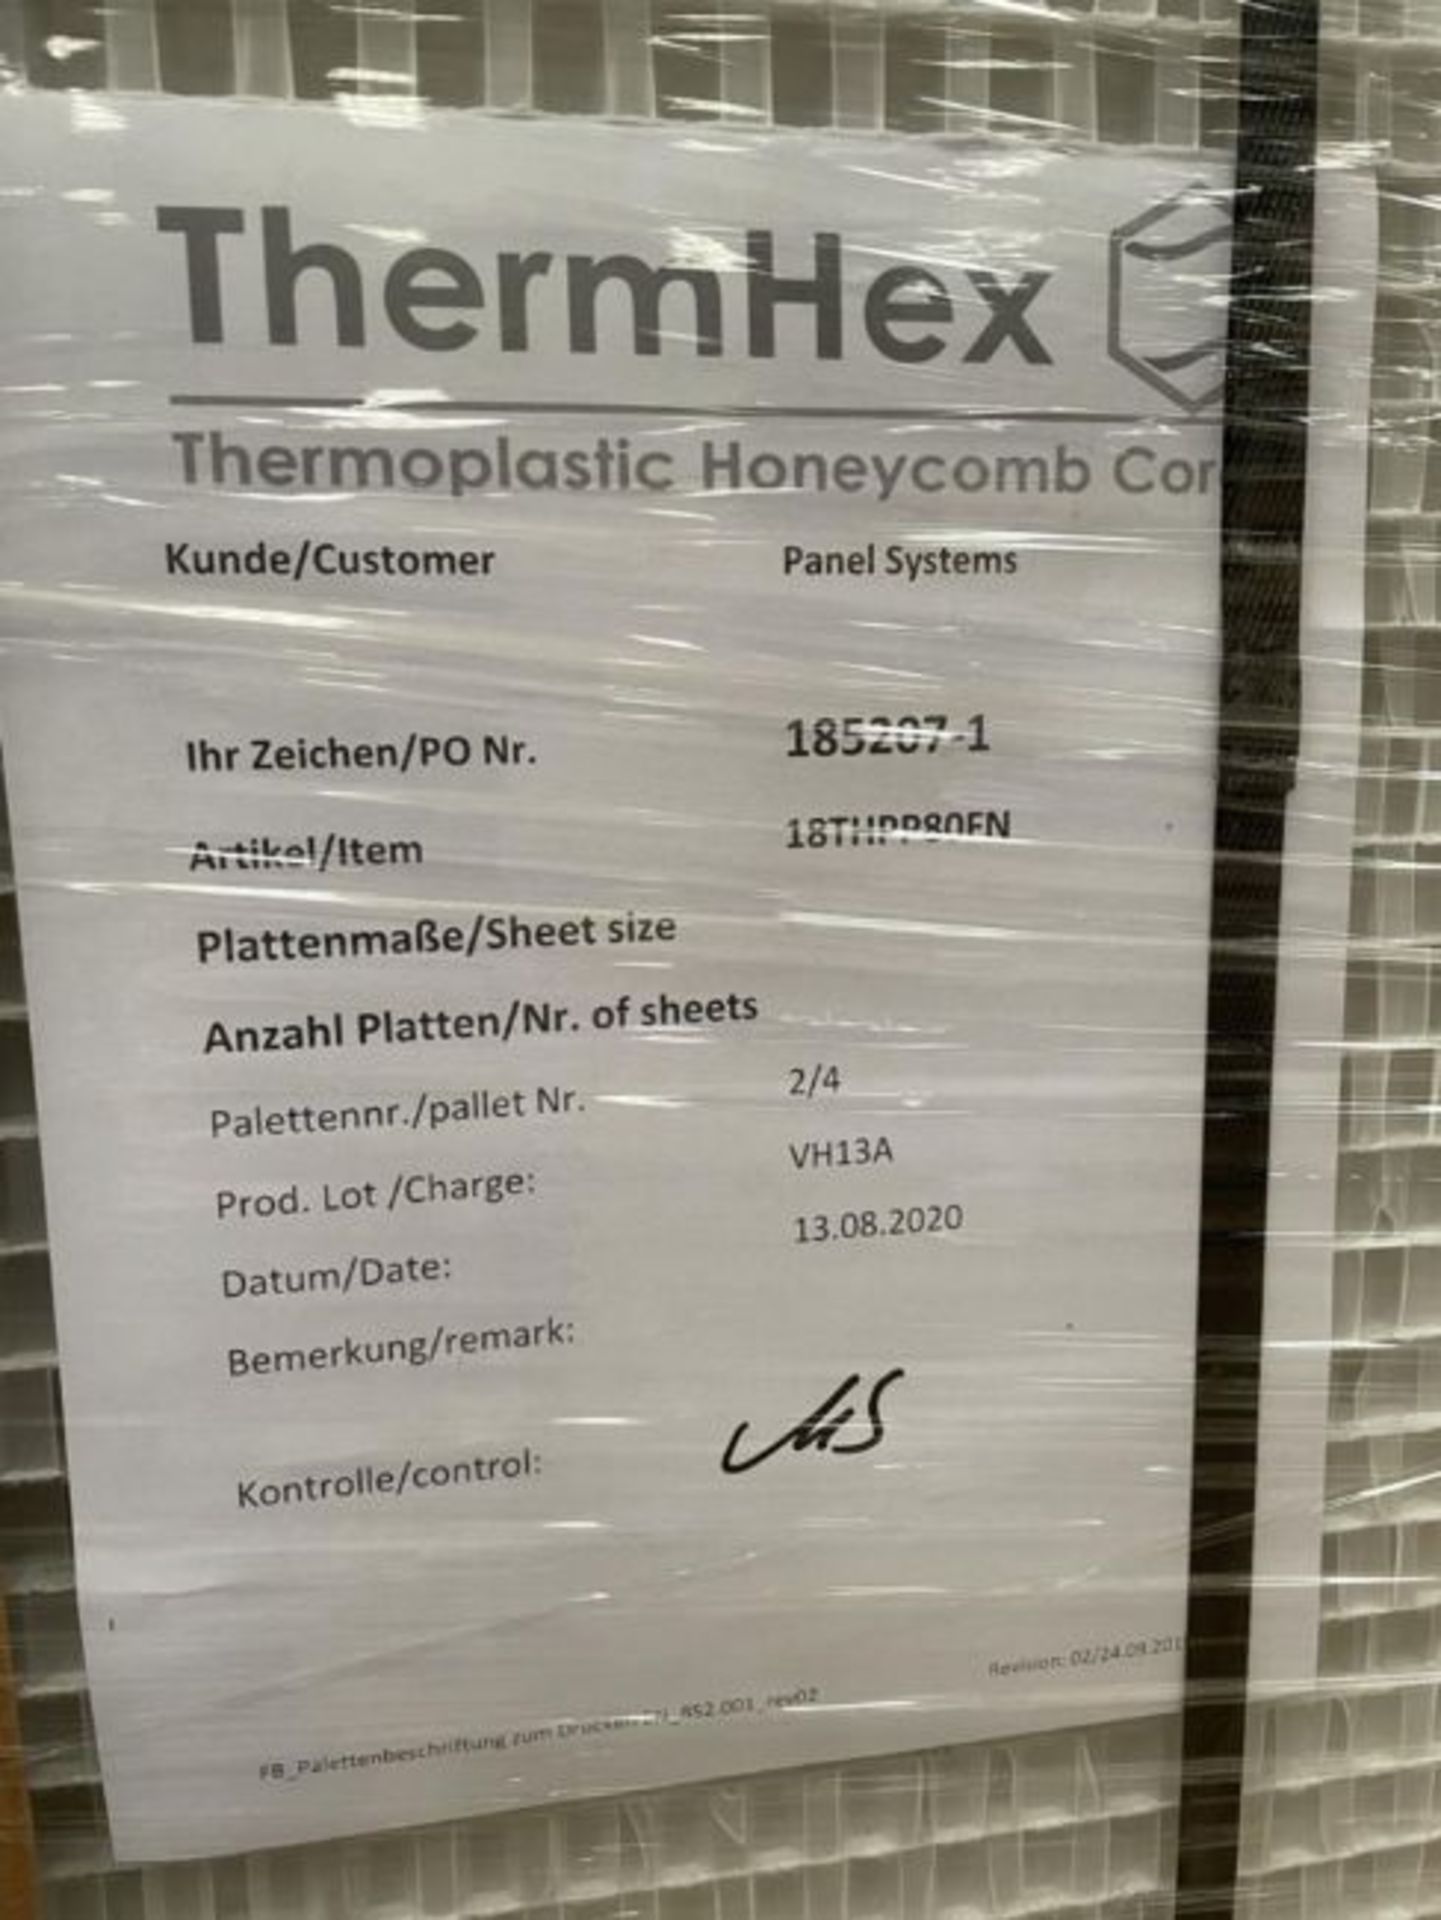 6 x ThermHex Thermoplastic Honeycomb Core Panels - Size 3175 x 1210 x 20mm - New Stock - Lightweight - Image 9 of 10